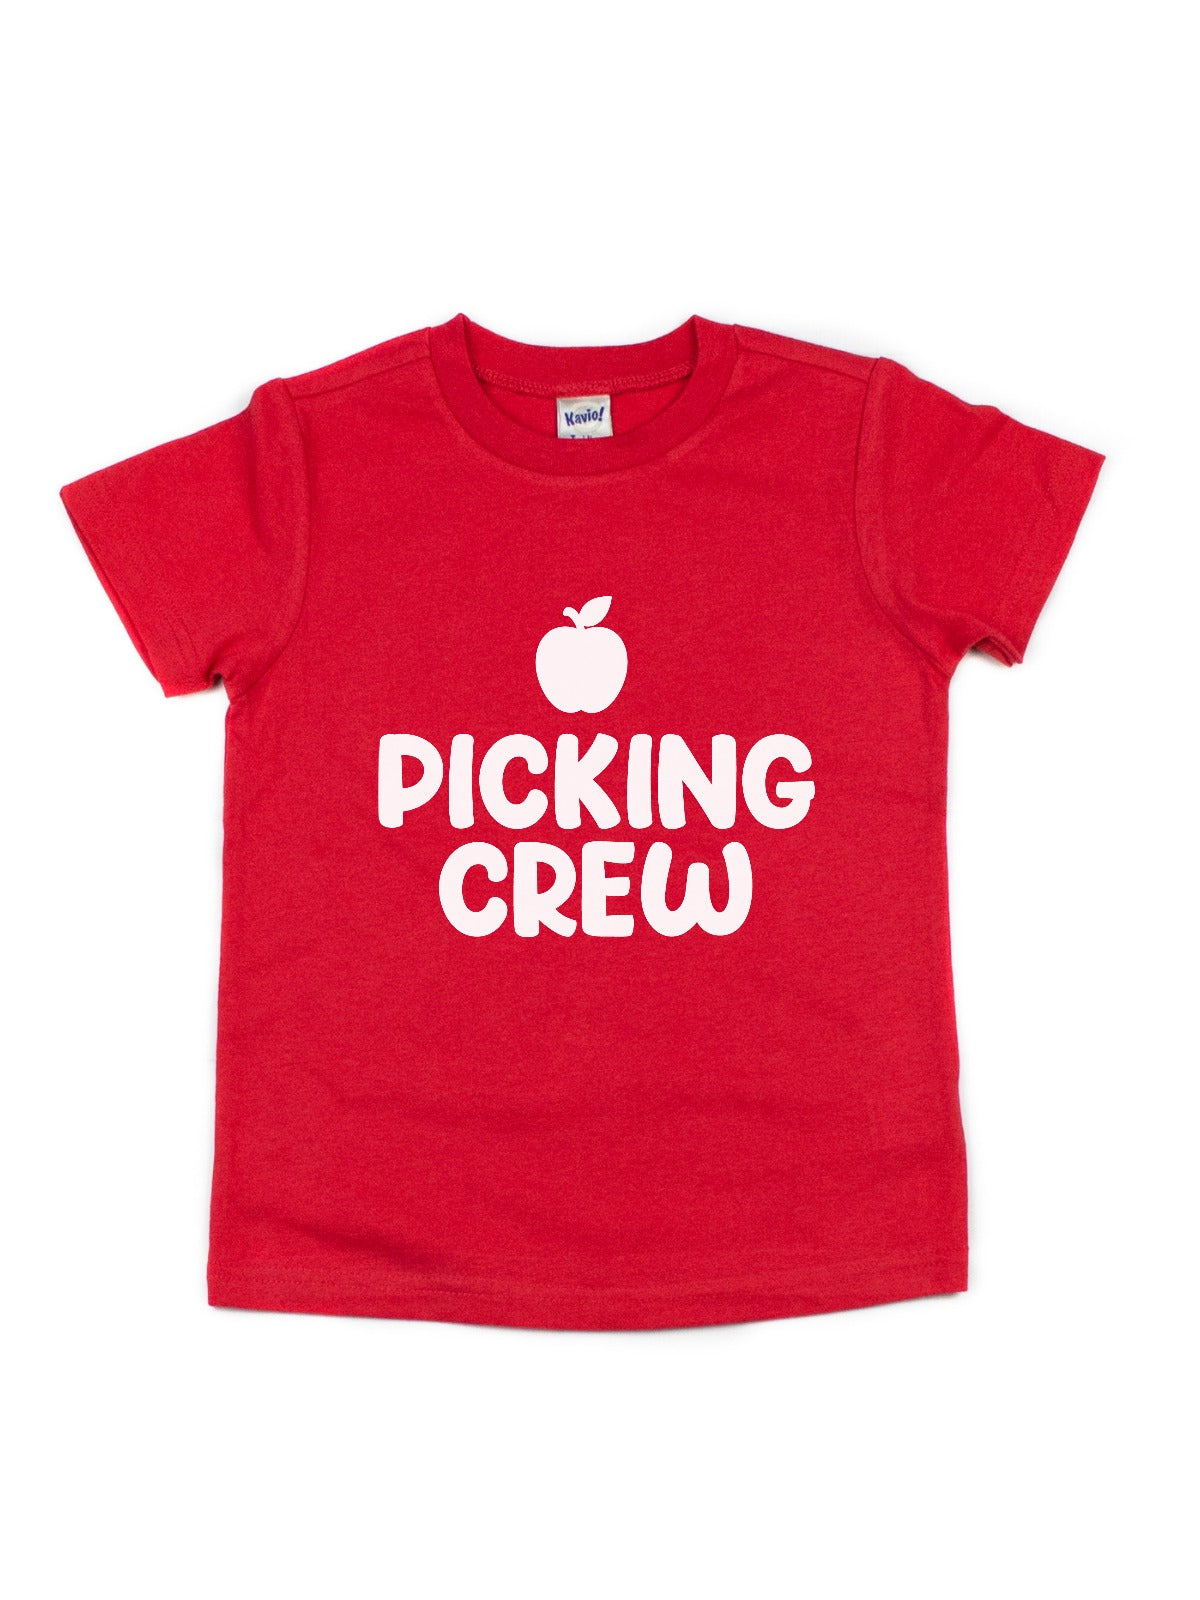 apple orchard shirt for kids